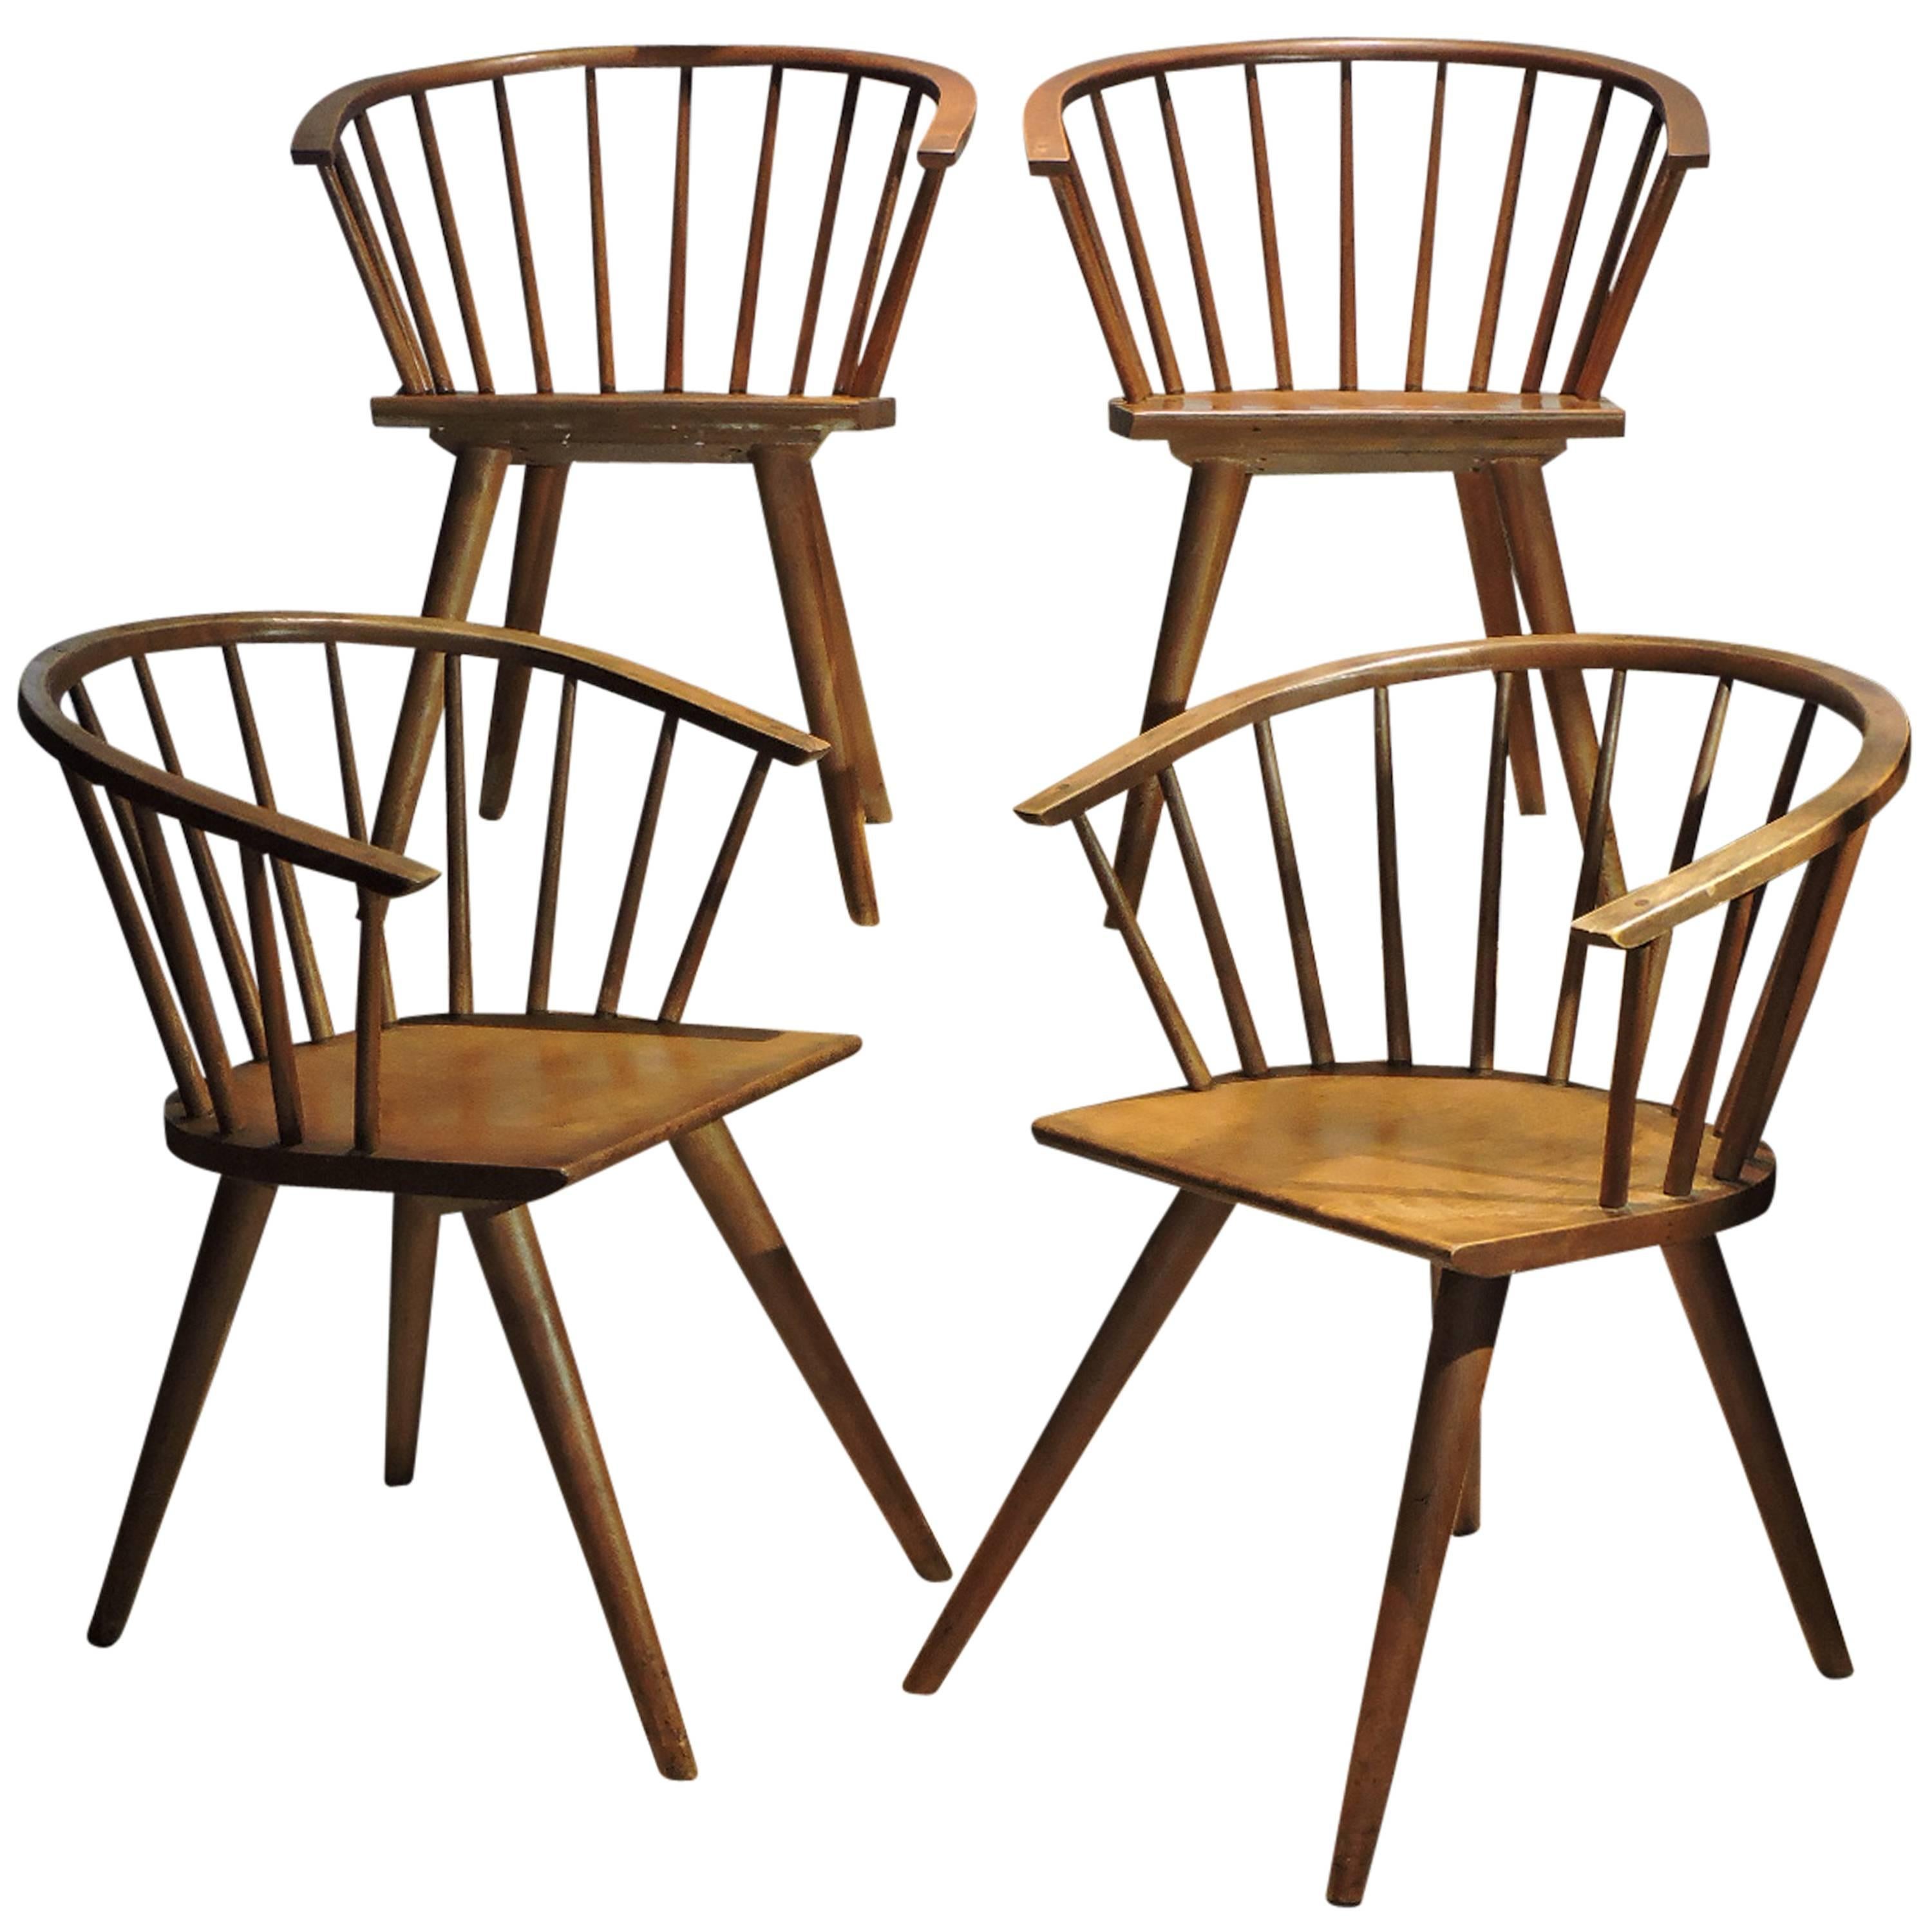  Modernist Windsor Chairs by Russel Wright for Conant Ball